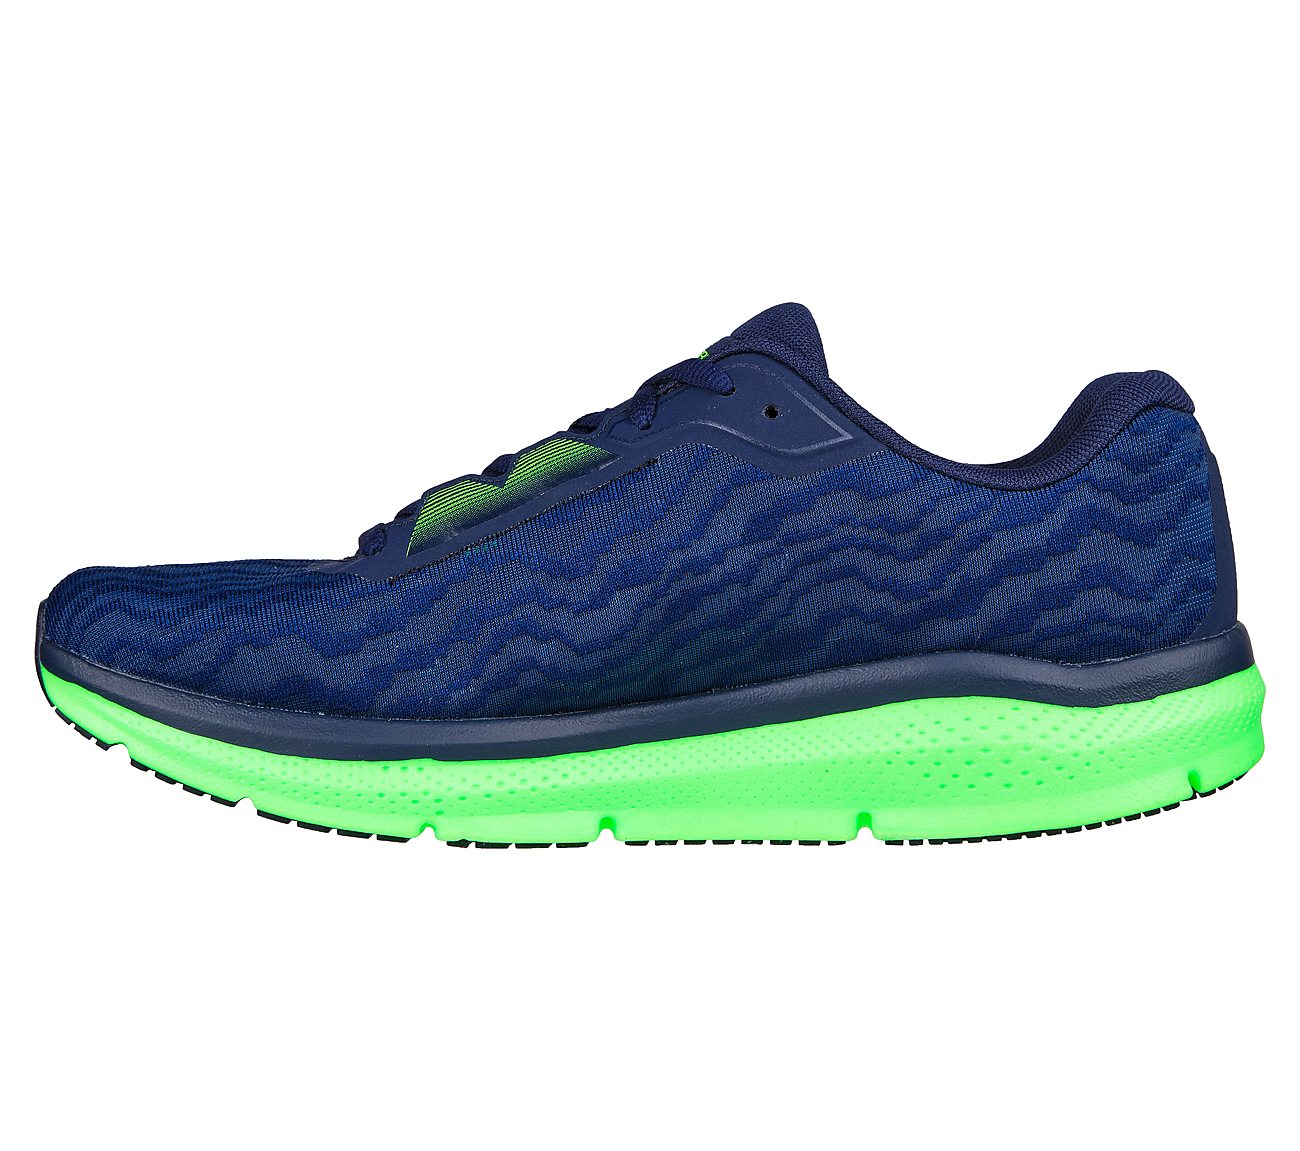 GO RUN RIDE 10, NAVY/LIME Footwear Left View